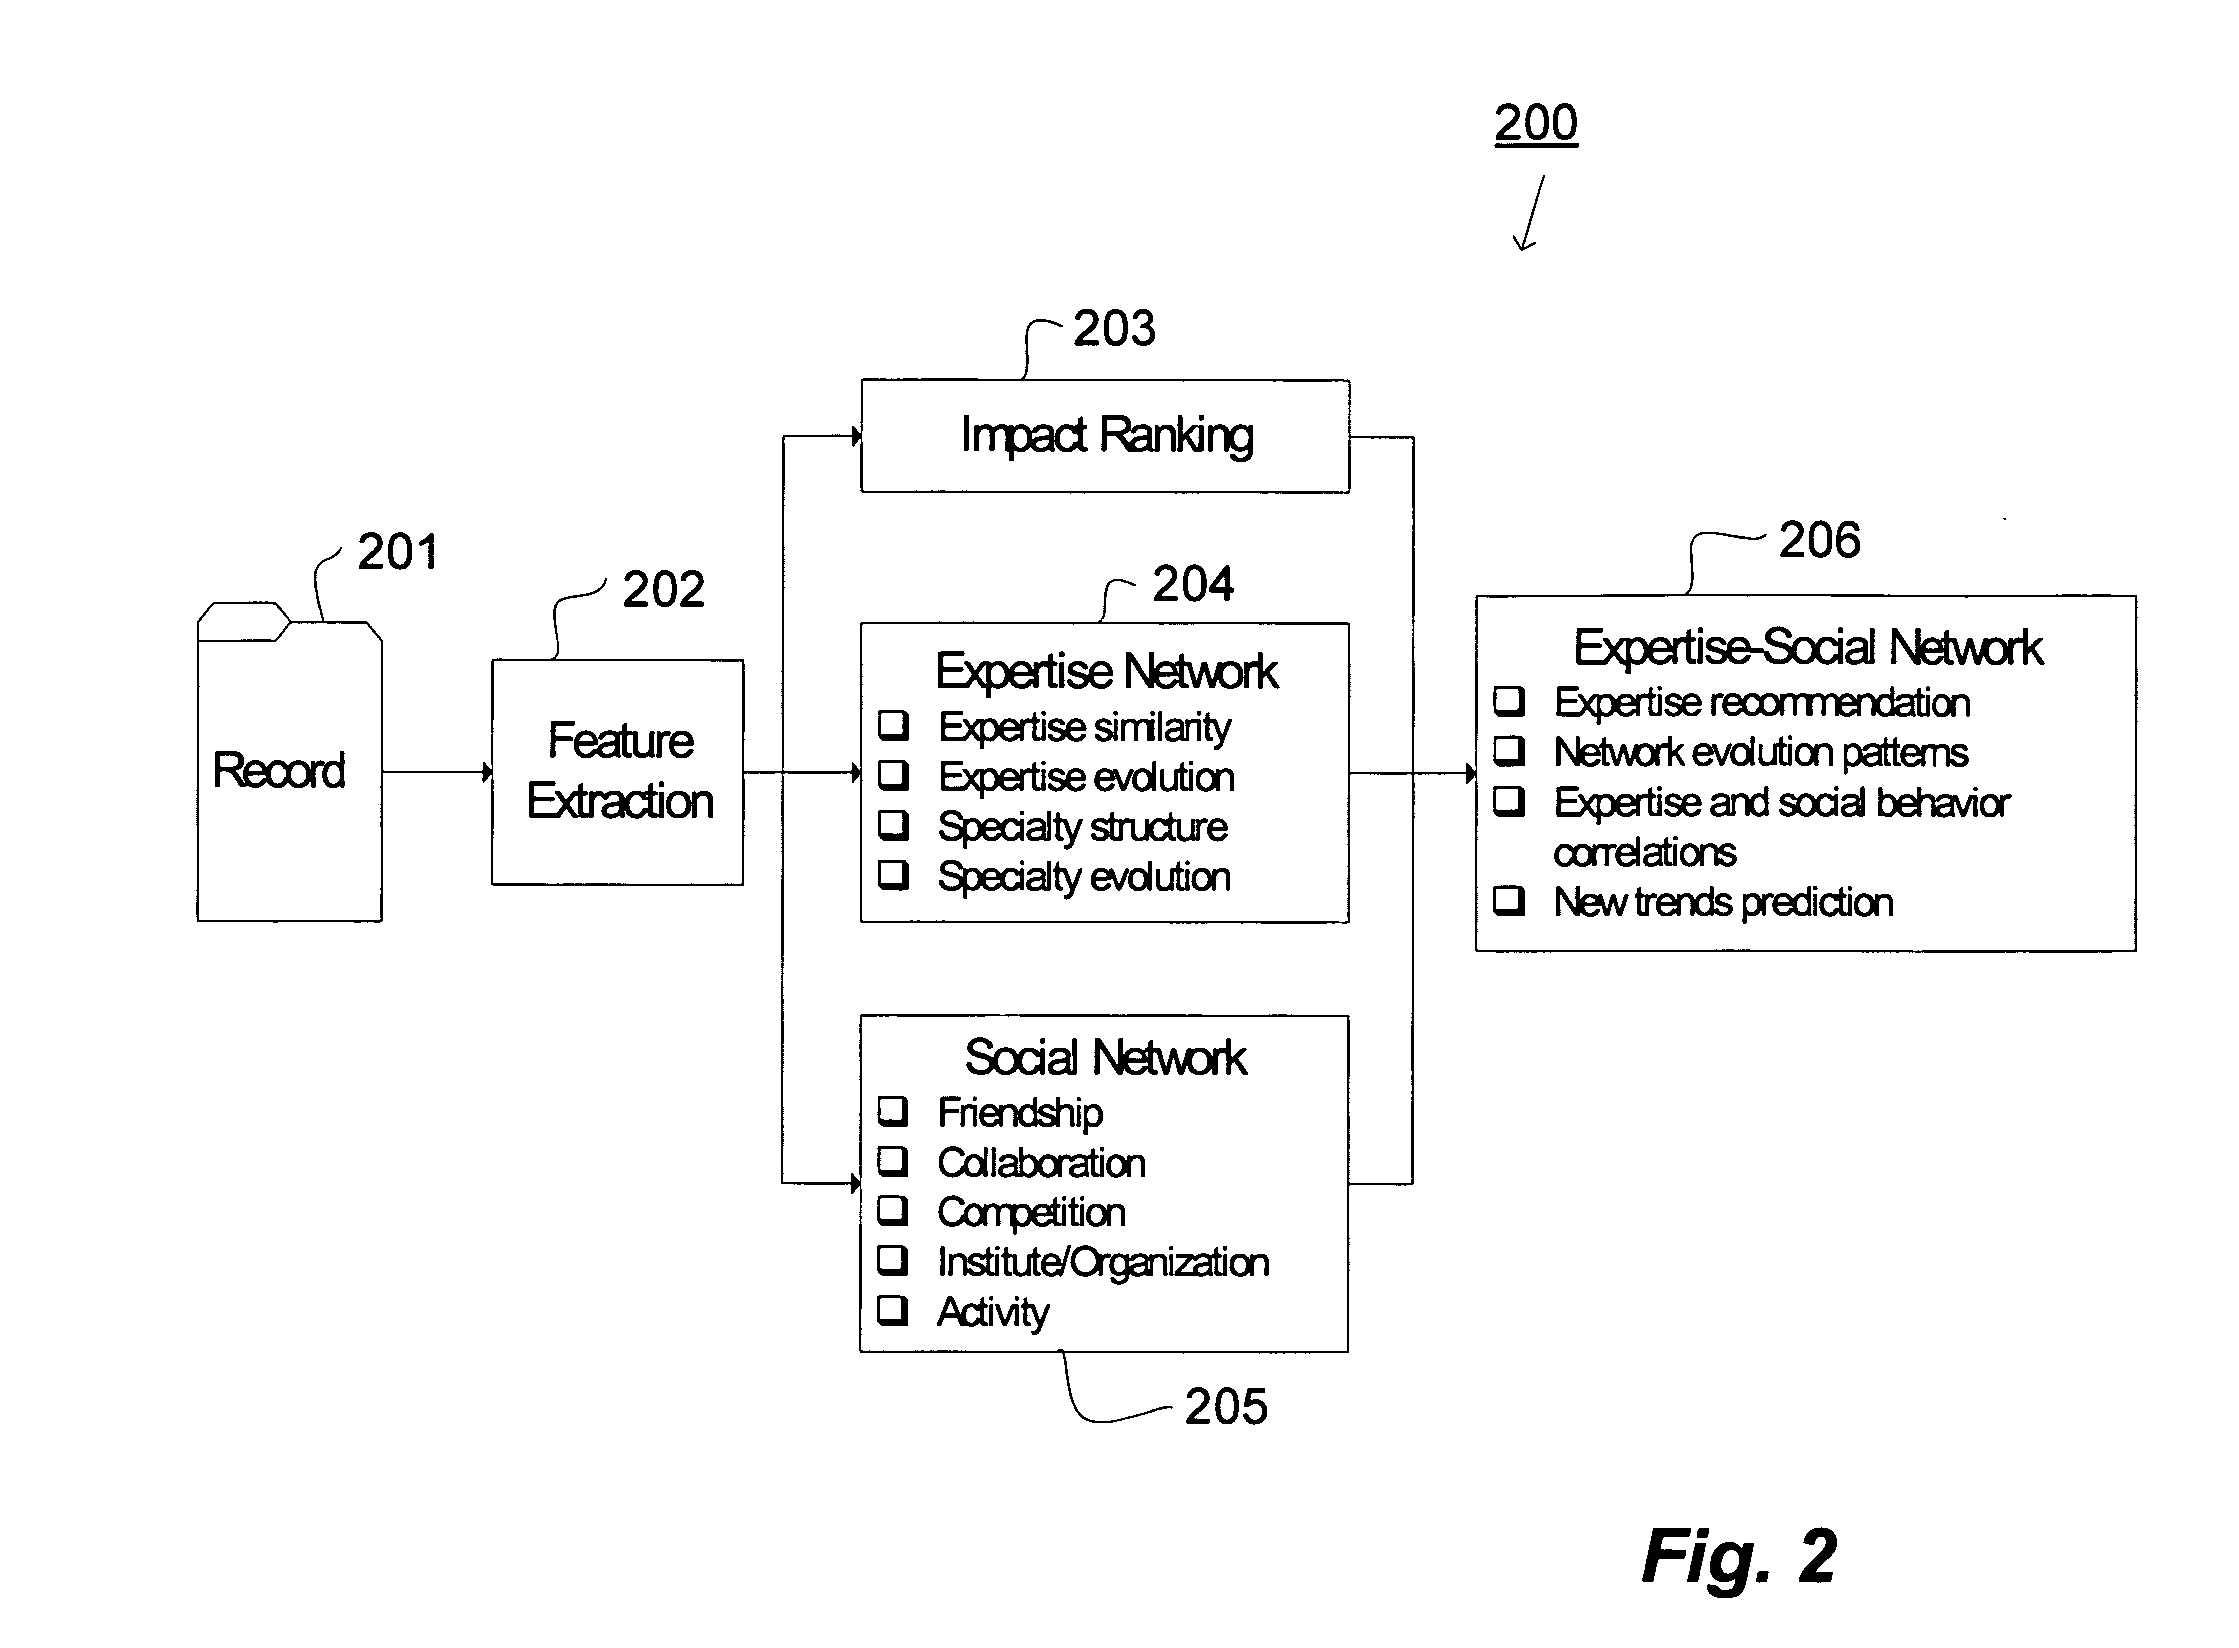 System and methods for data analysis and trend prediction